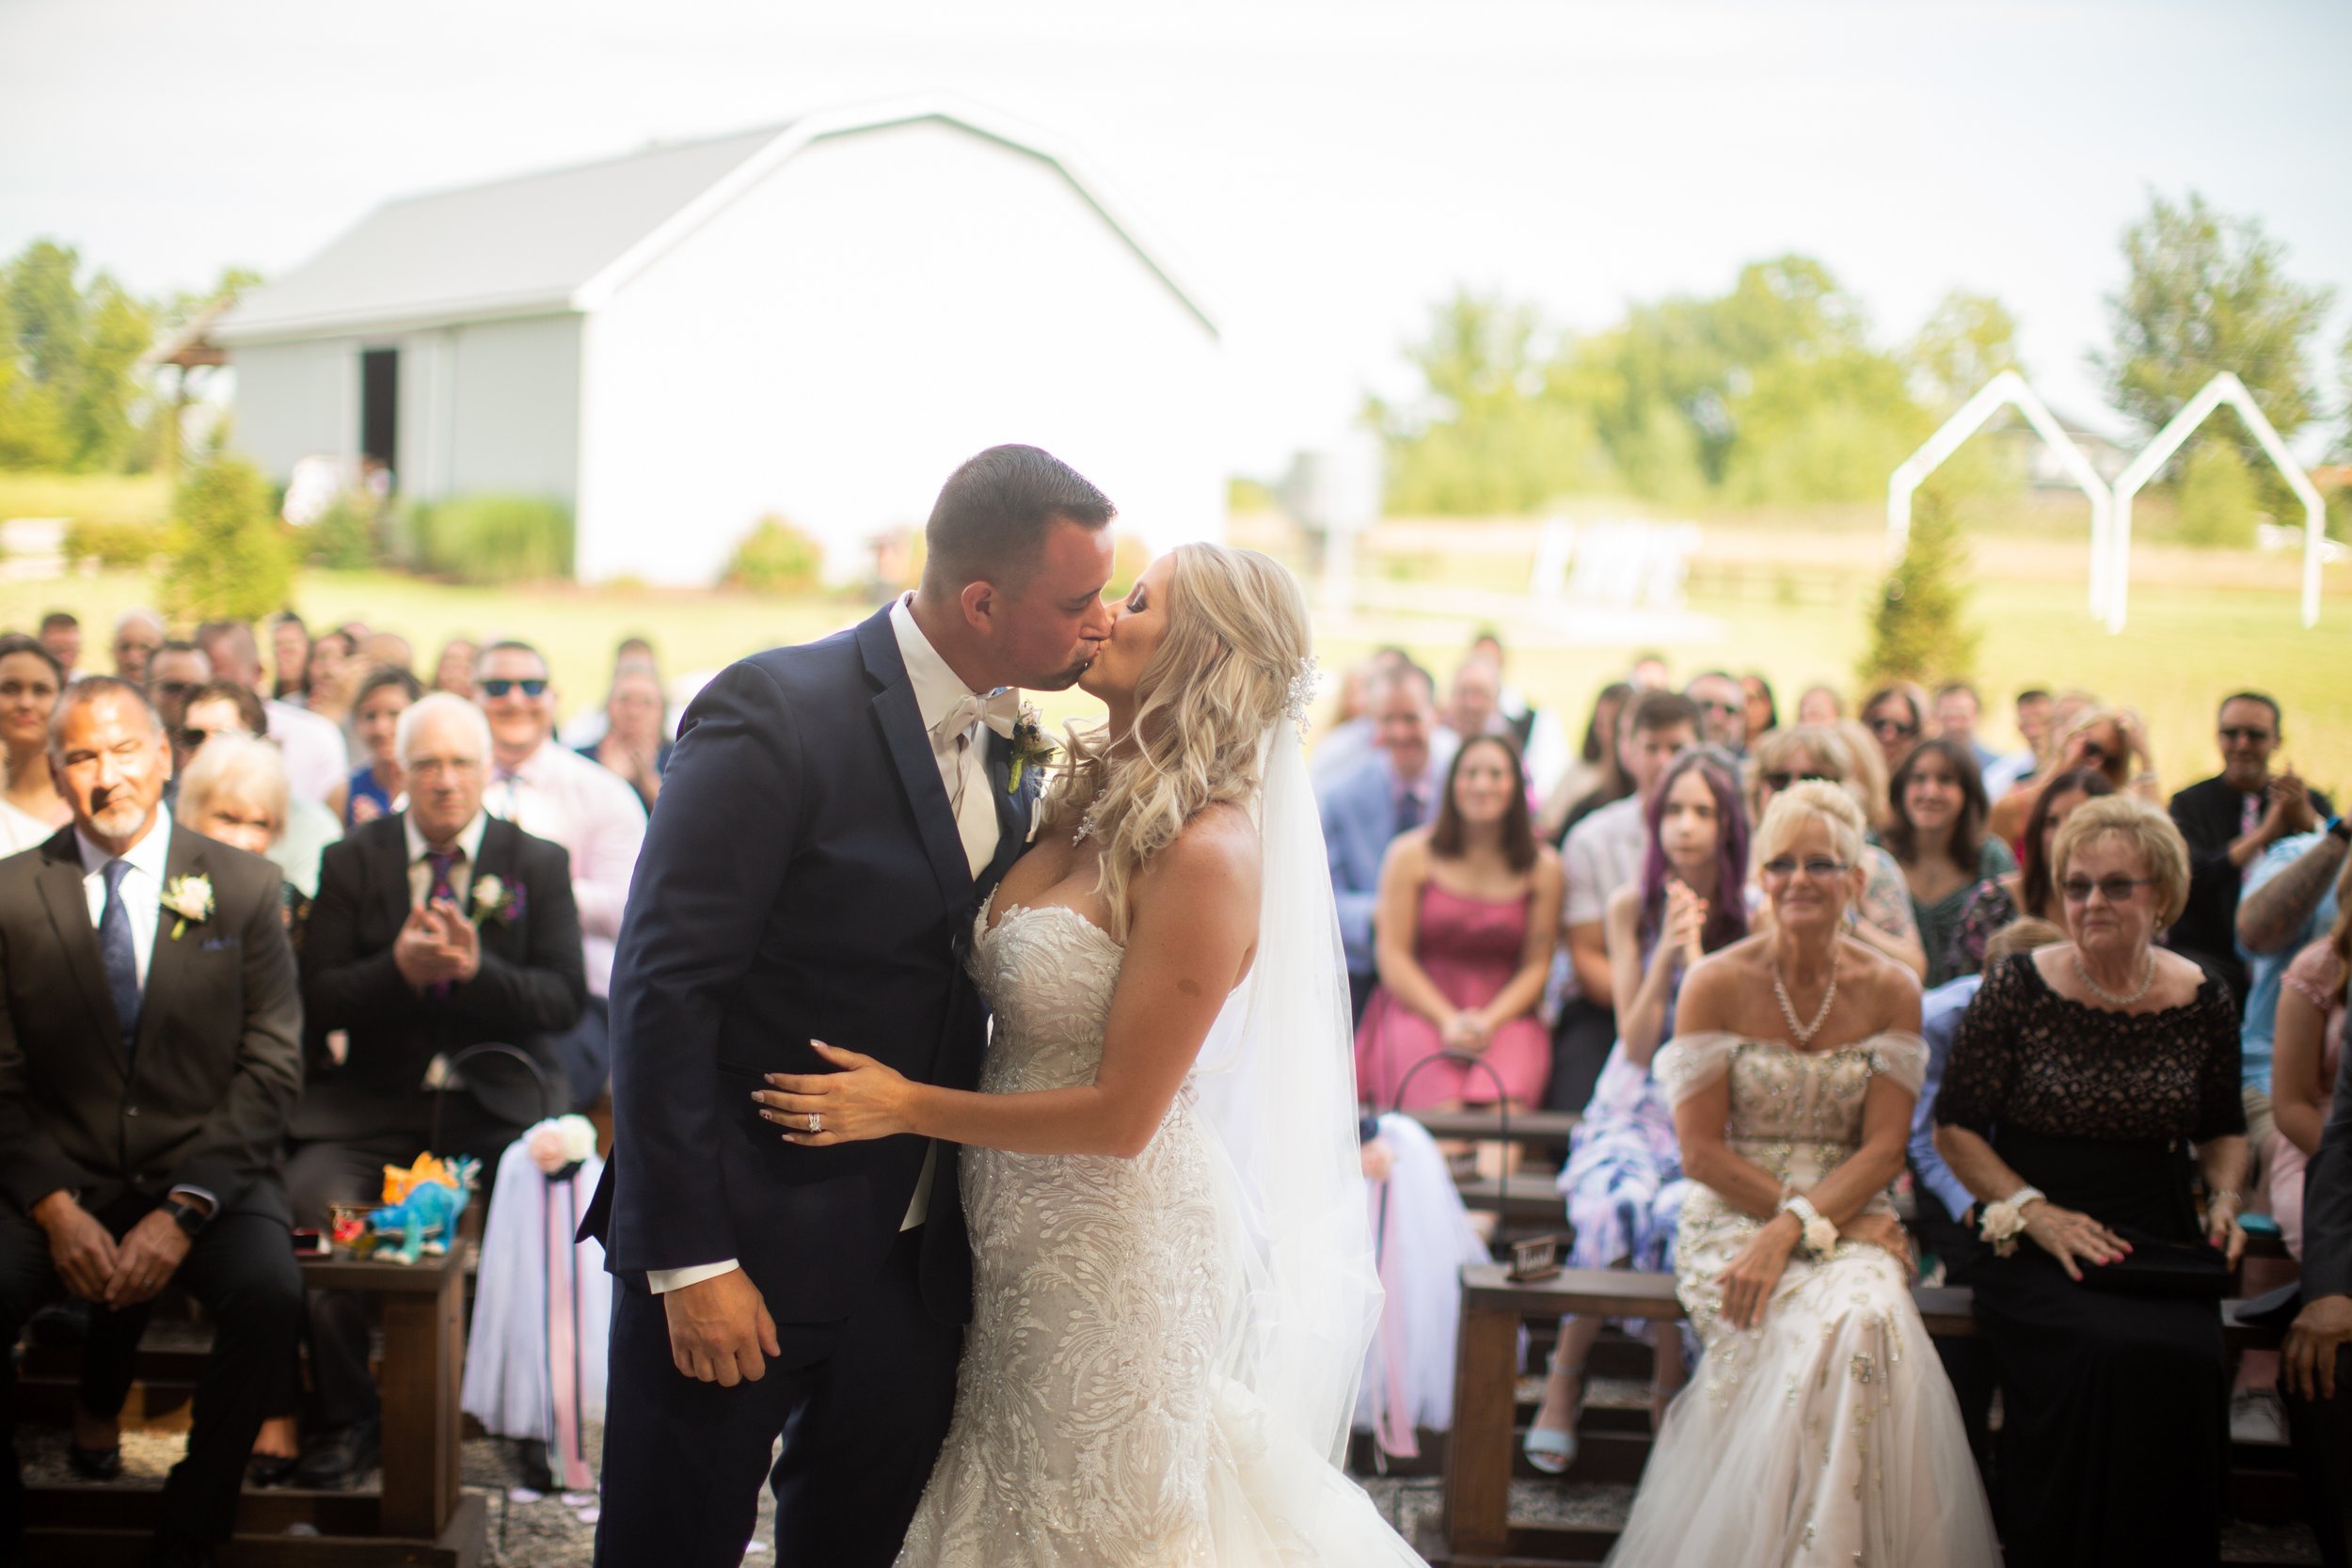 Bride and groom's first kiss at  Meadow wood acres in morrice, michigan